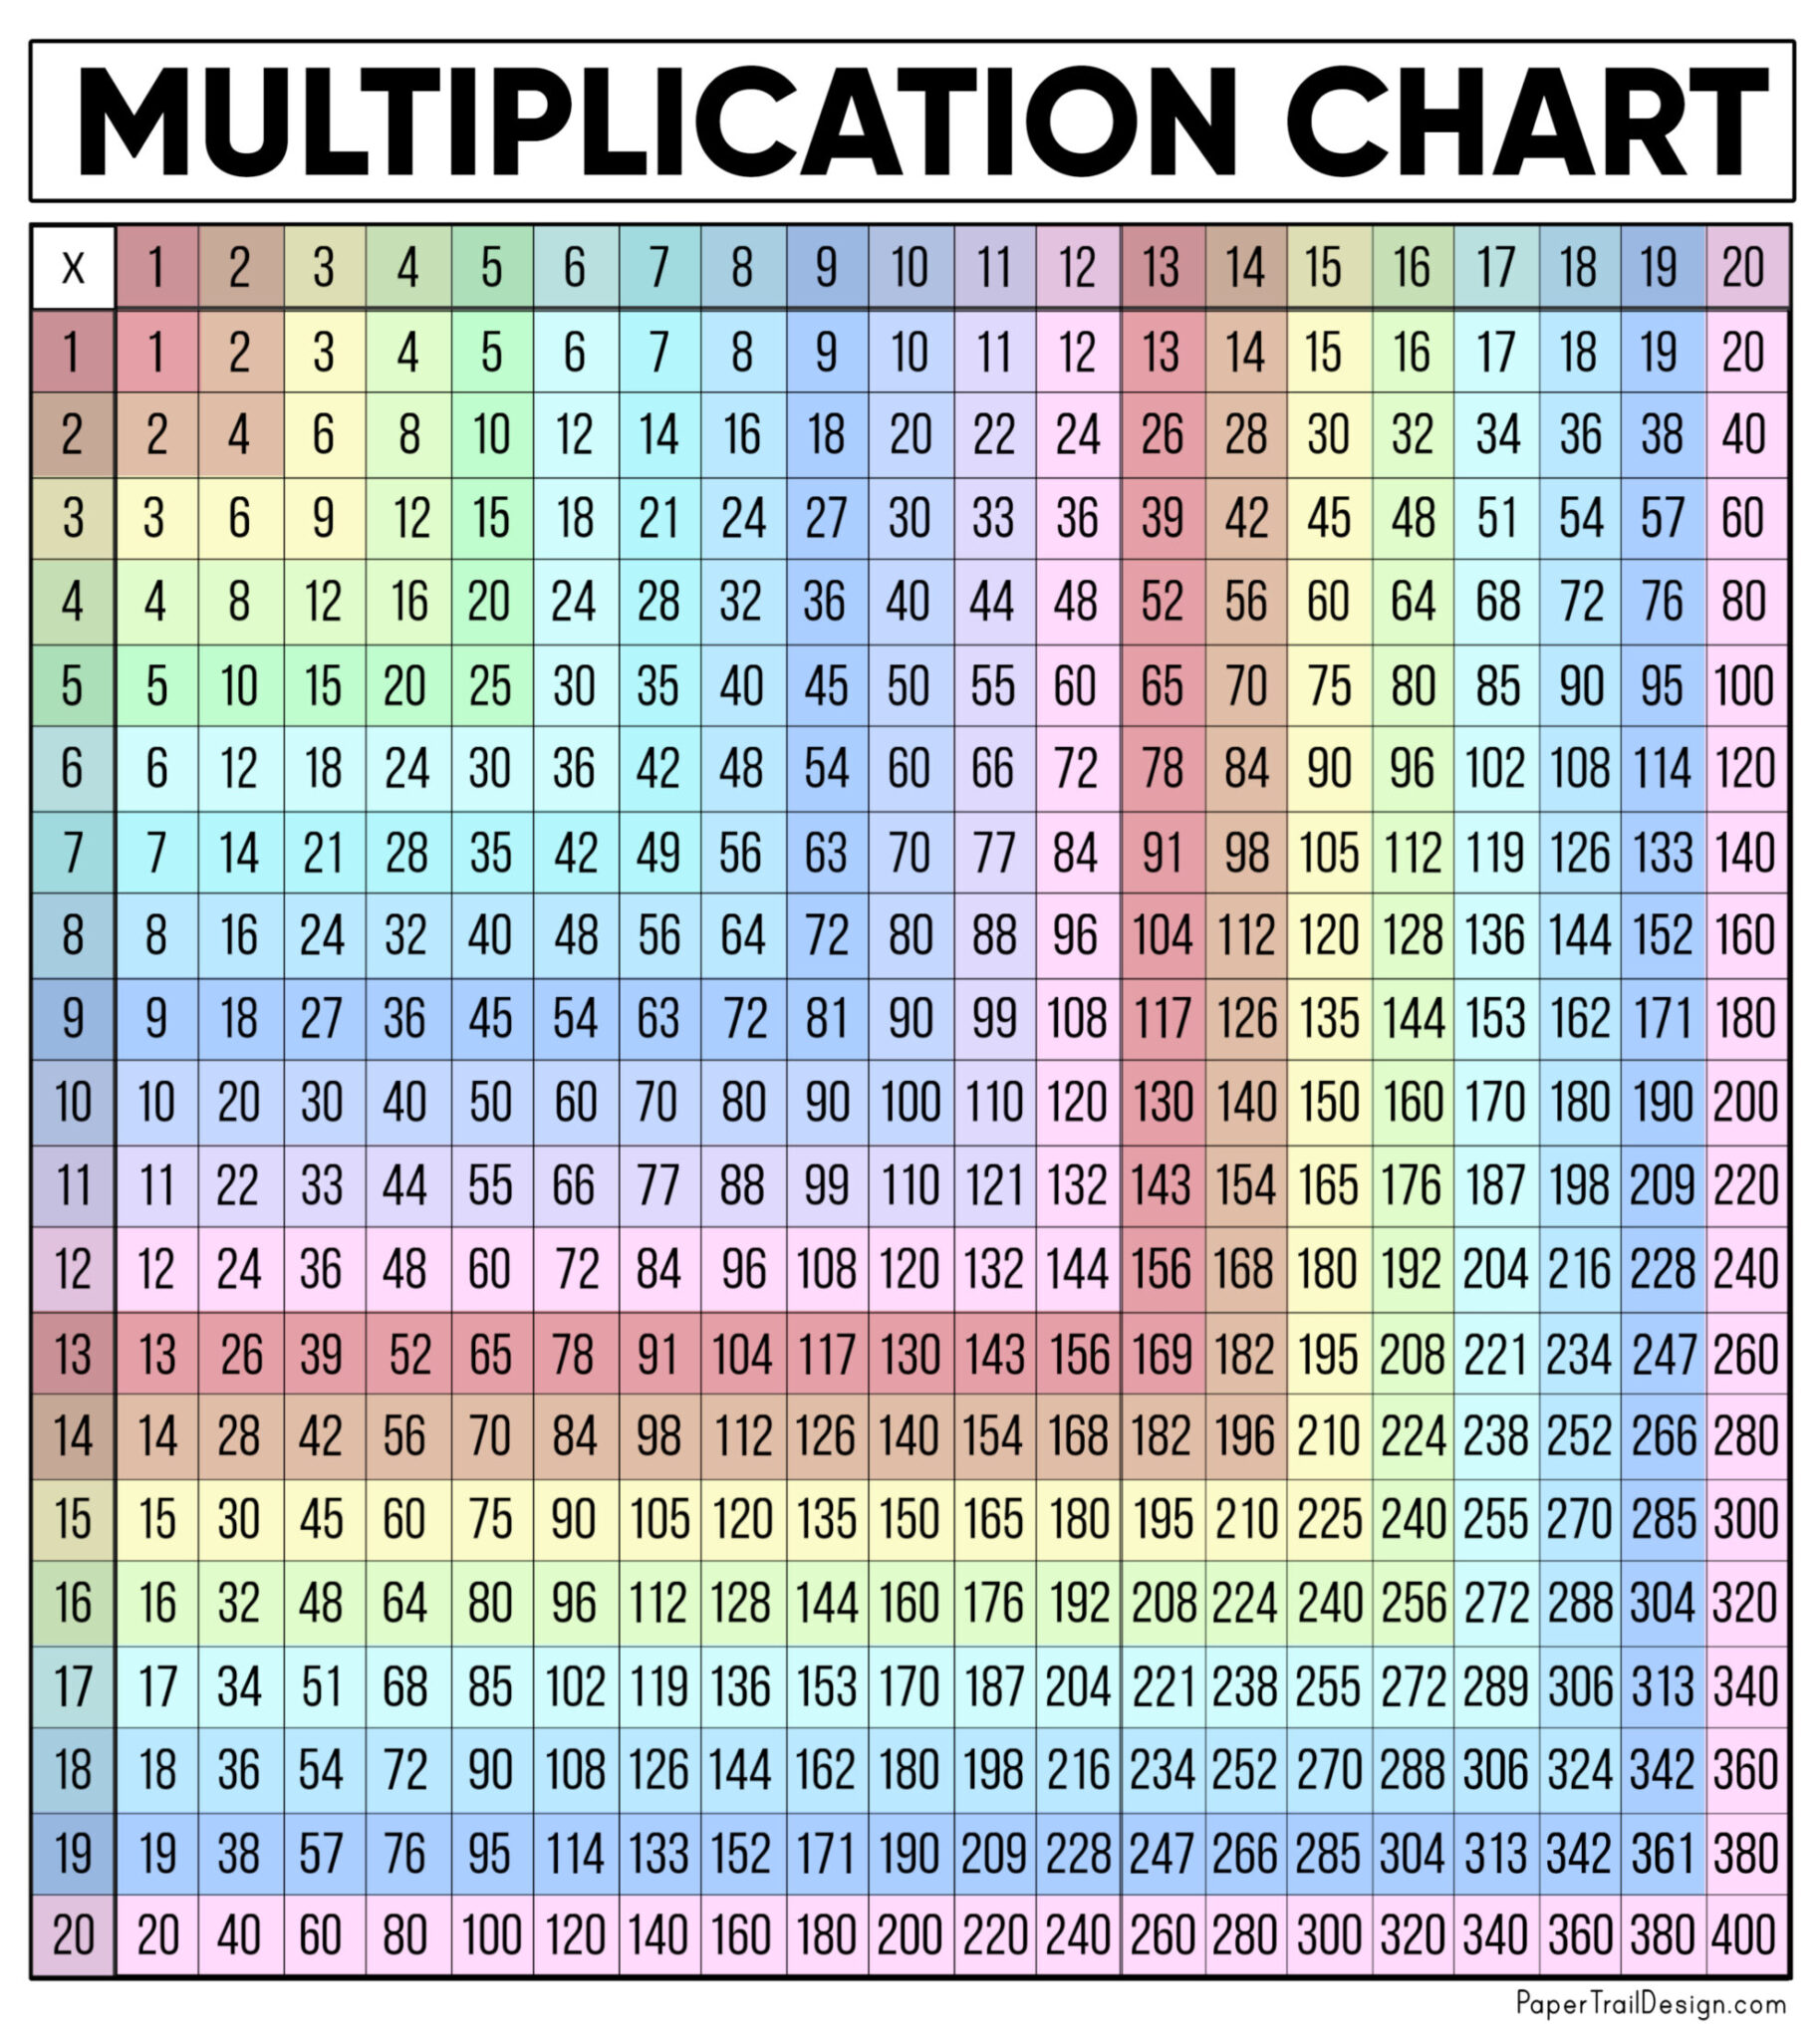 free-multiplication-chart-printable-paper-trail-design